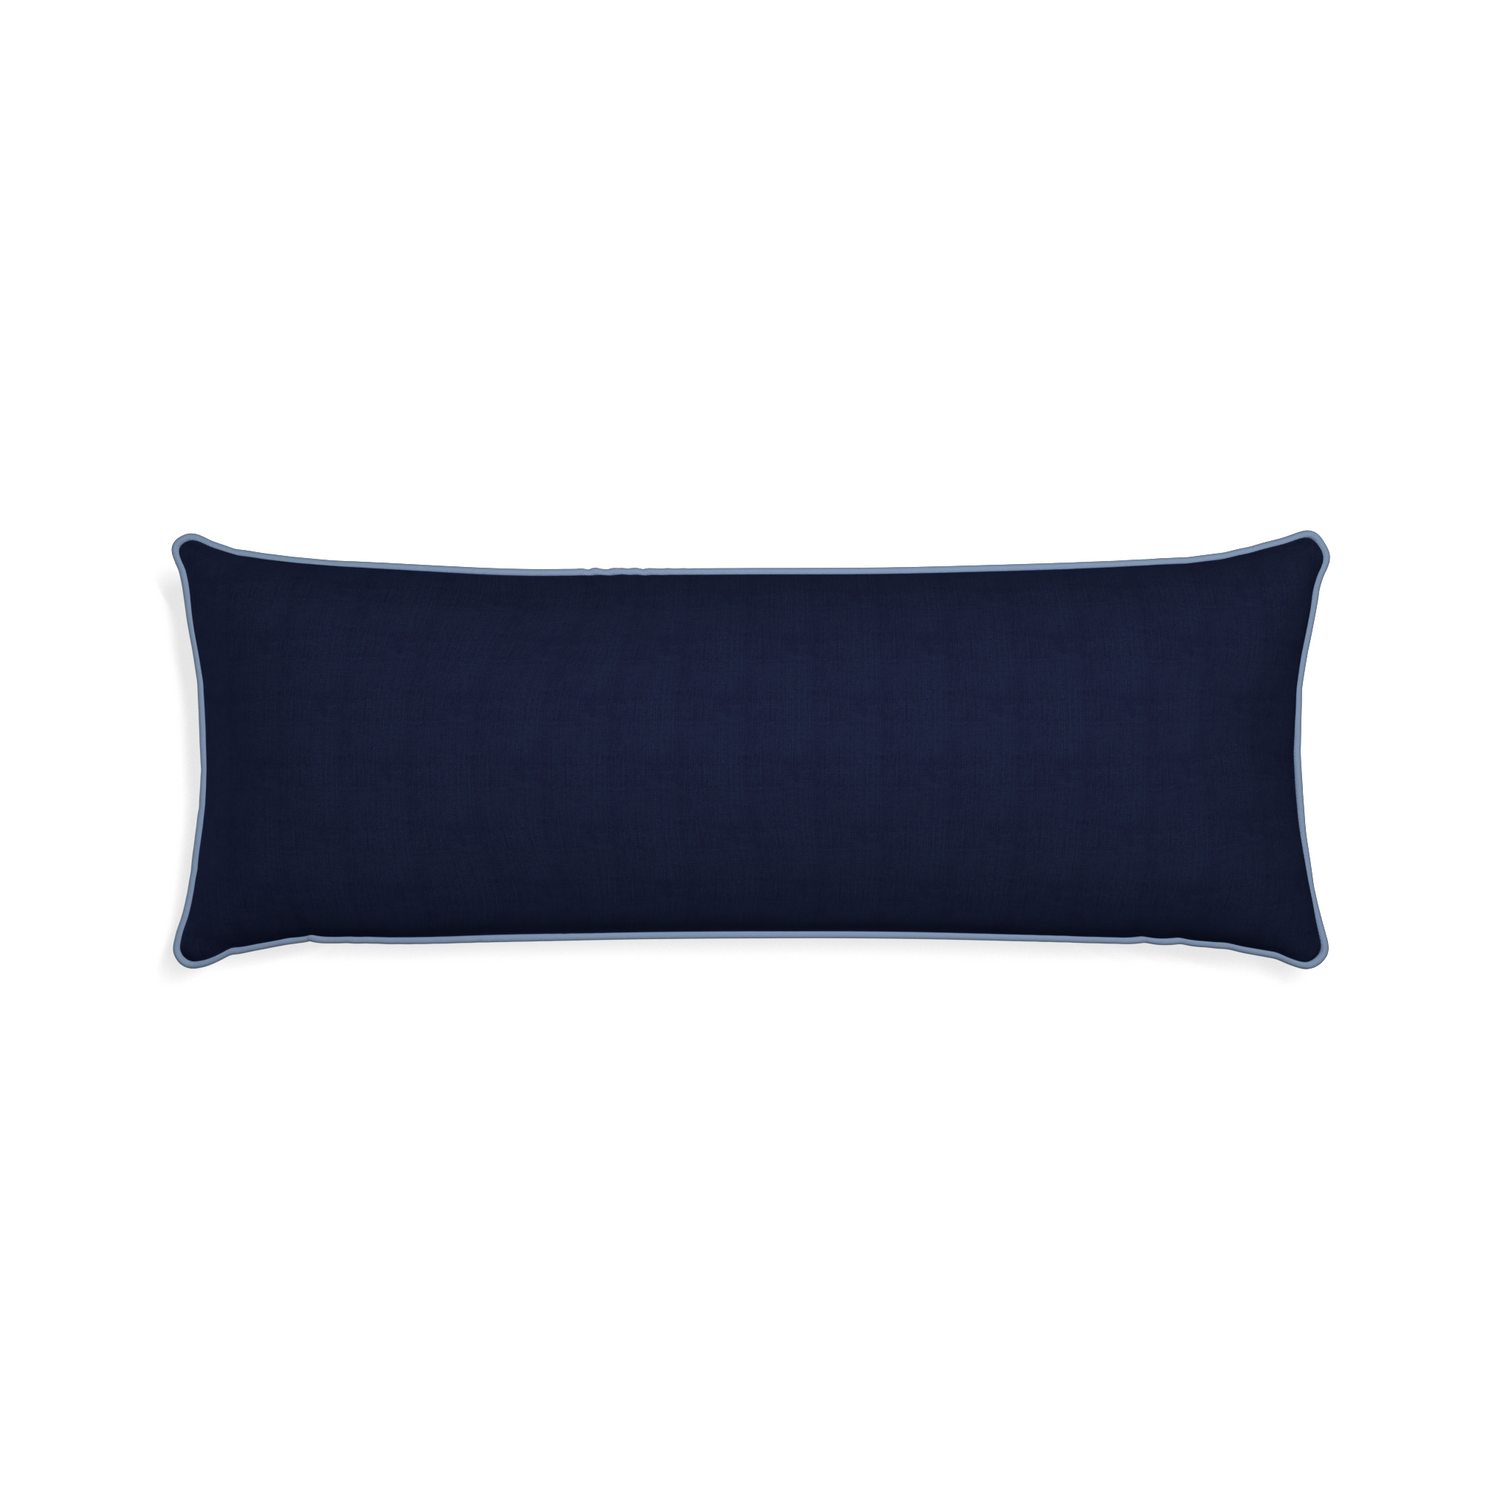 Xl-lumbar midnight custom pillow with sky piping on white background